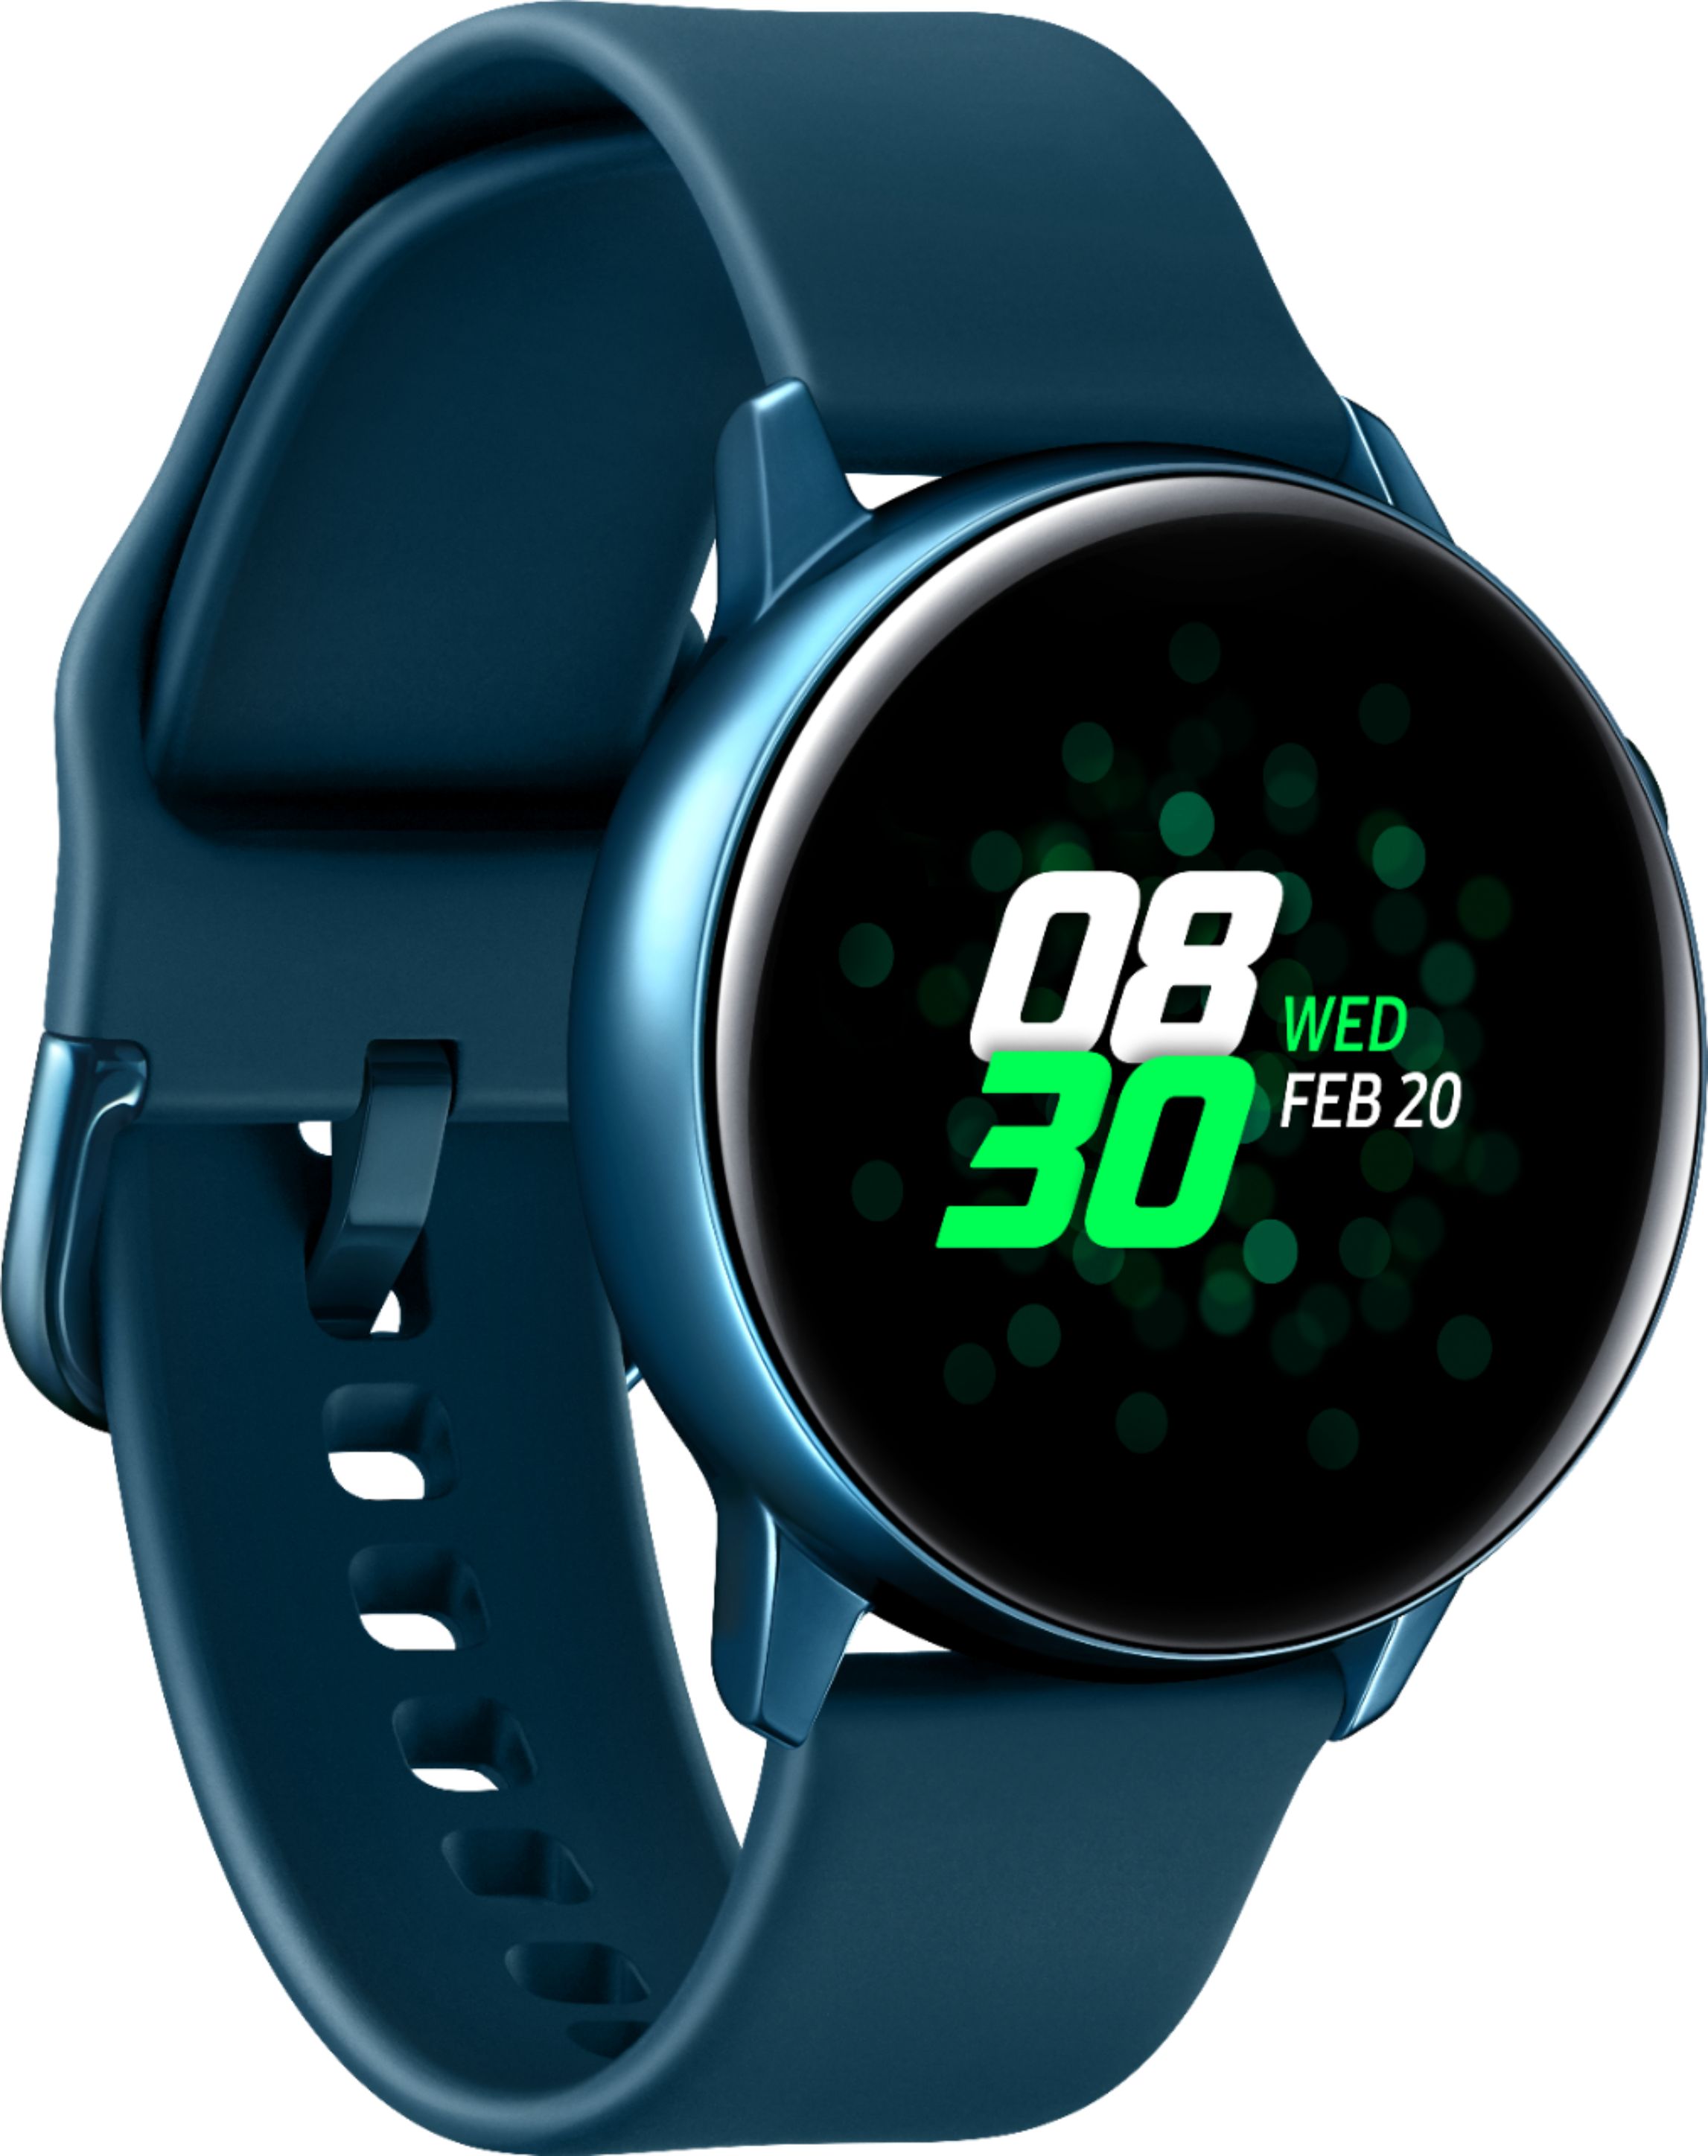 Angle View: Samsung - Geek Squad Certified Refurbished Galaxy Watch Active Smartwatch 40mm Aluminium - Green